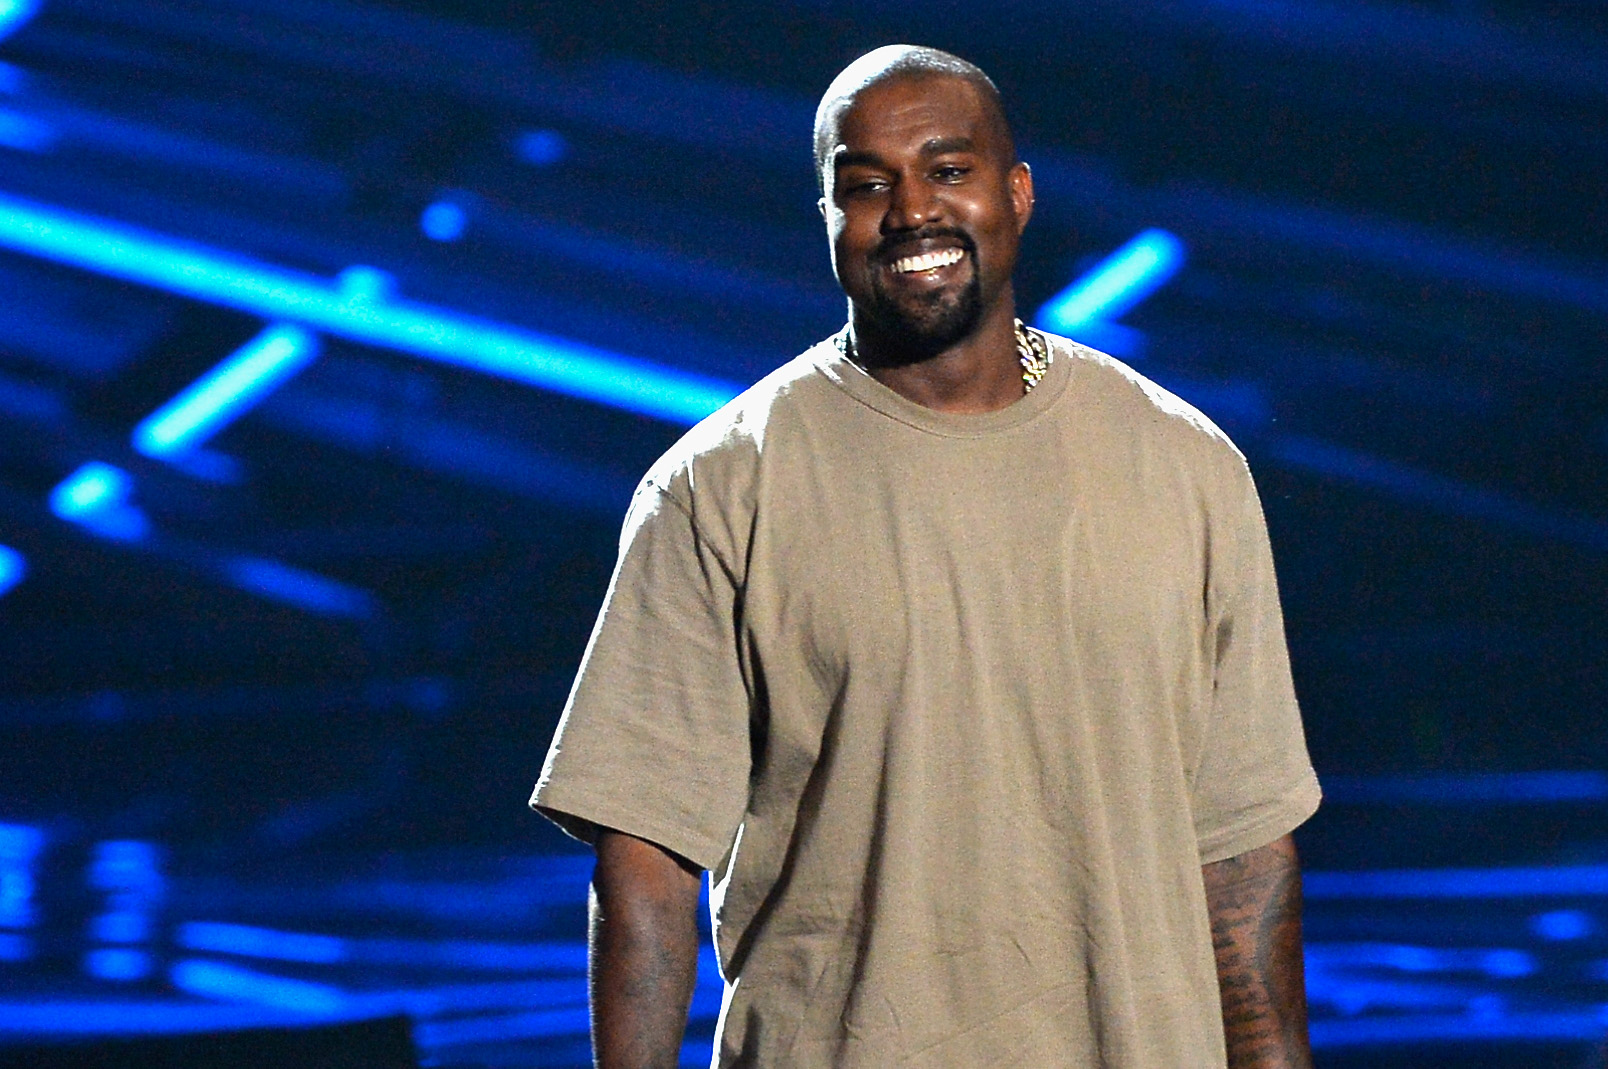 Kanye West Released From Hospital, Tommy Hilfiger Moves Show to LA